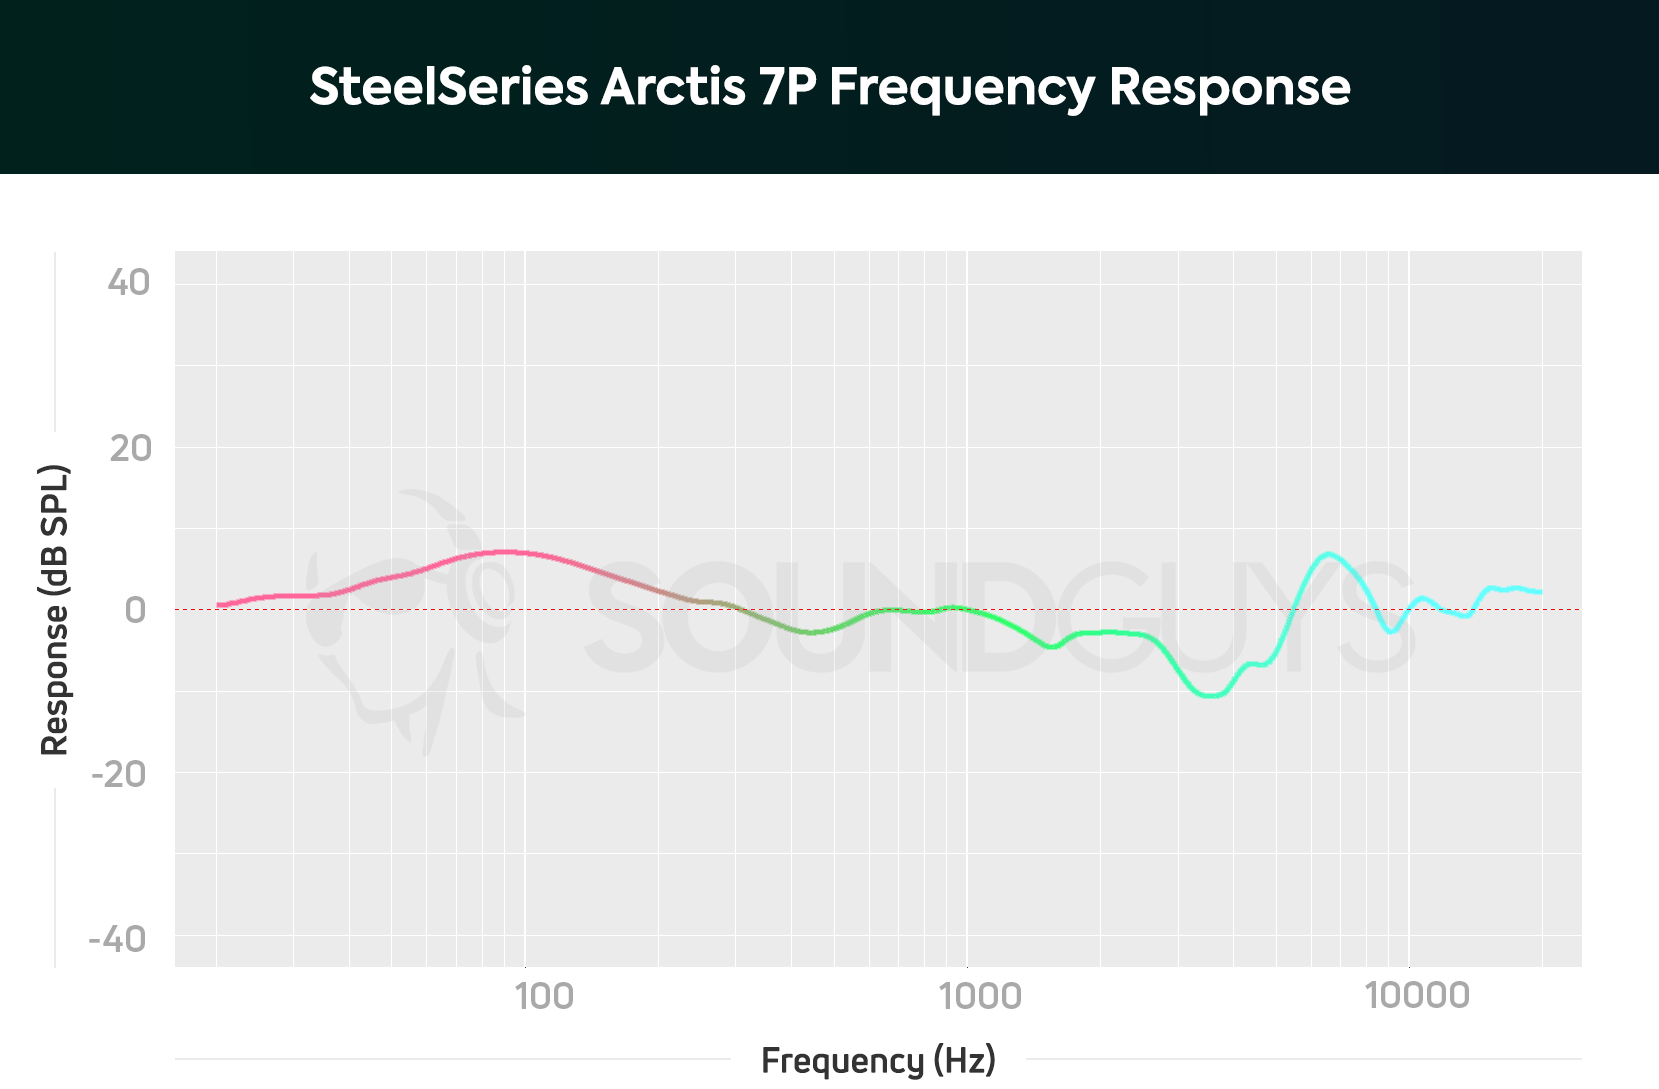 A frequency response chart for the SteelSeries Arctis 7P gaming headset, which shows a slight boost in bass range sound.